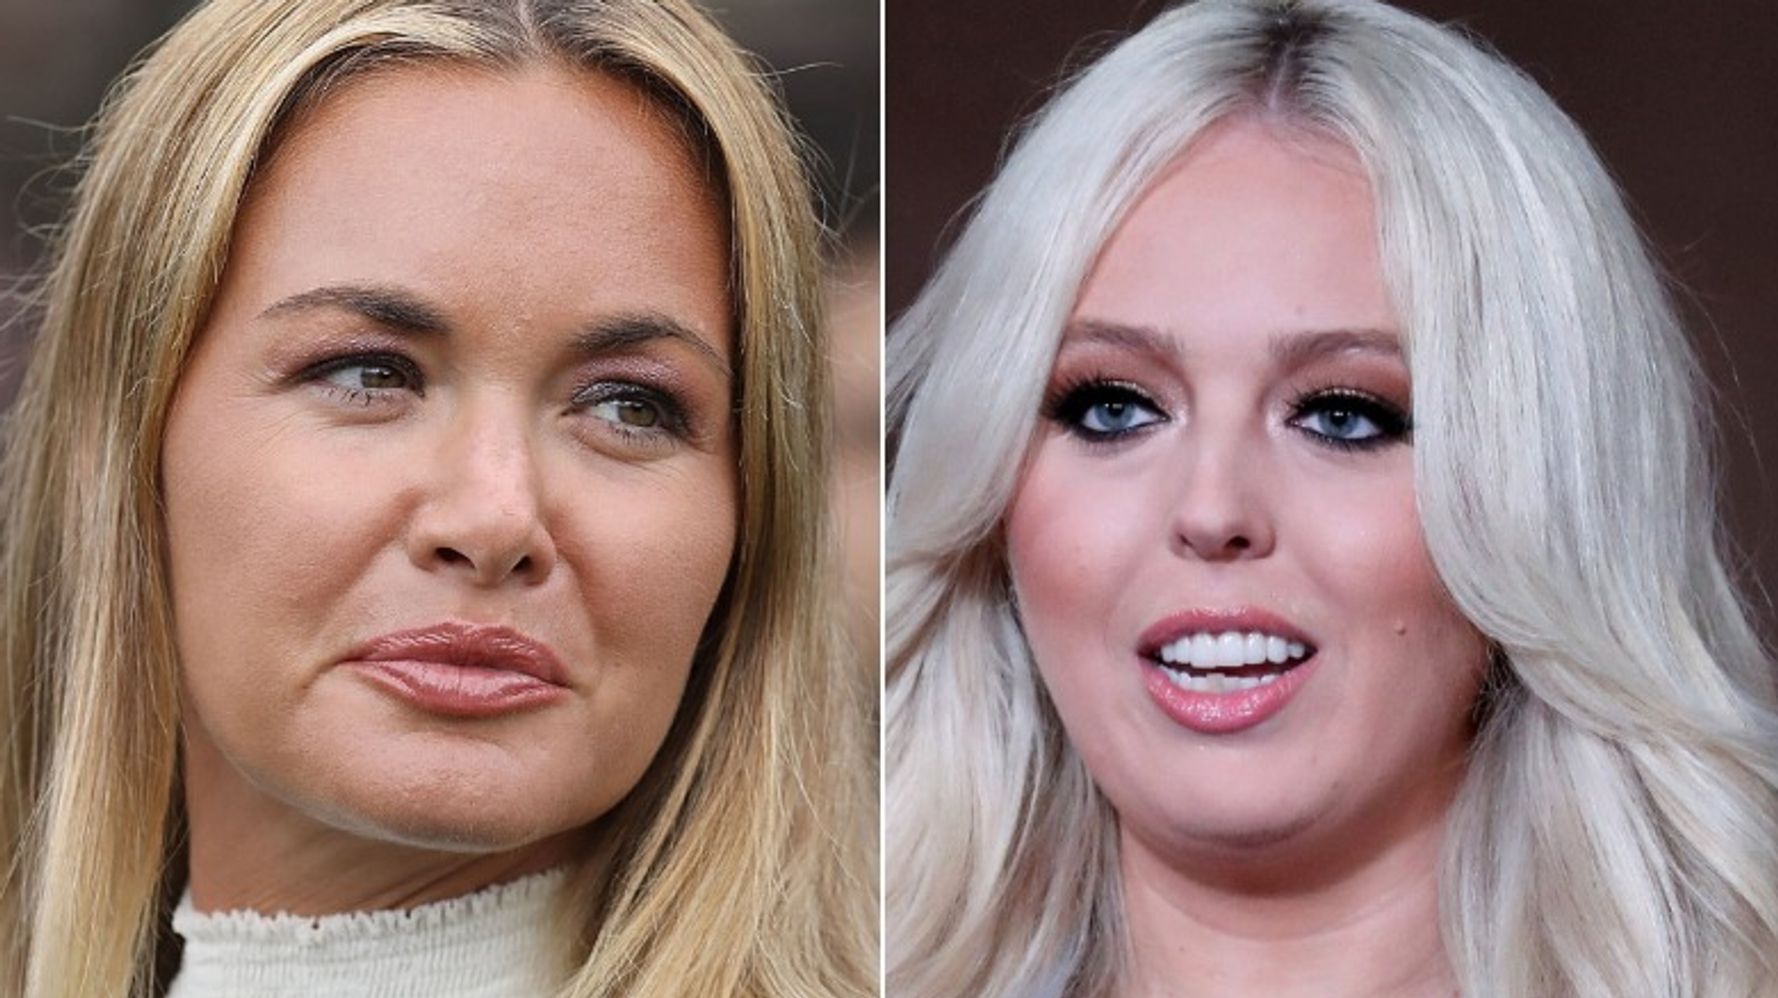 Tiffany And Vanessa Trump Got 'Inappropriately Close' To Secret Service Agents, New Book Claims